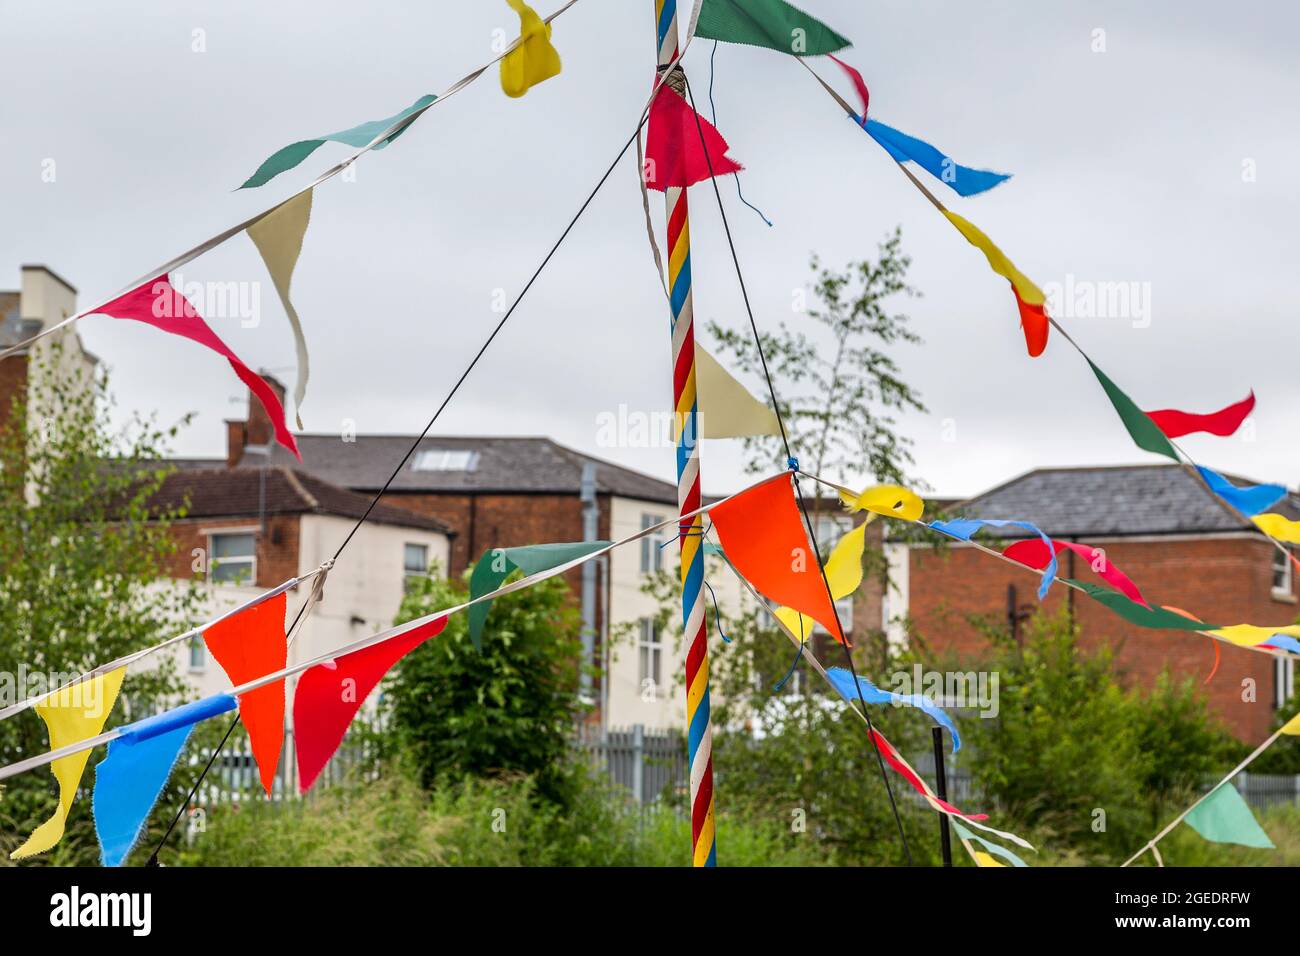 A brightly coloured flagpole and triangular flags contrast with the subdued colours of the dull urban landscape beyond. Stock Photo